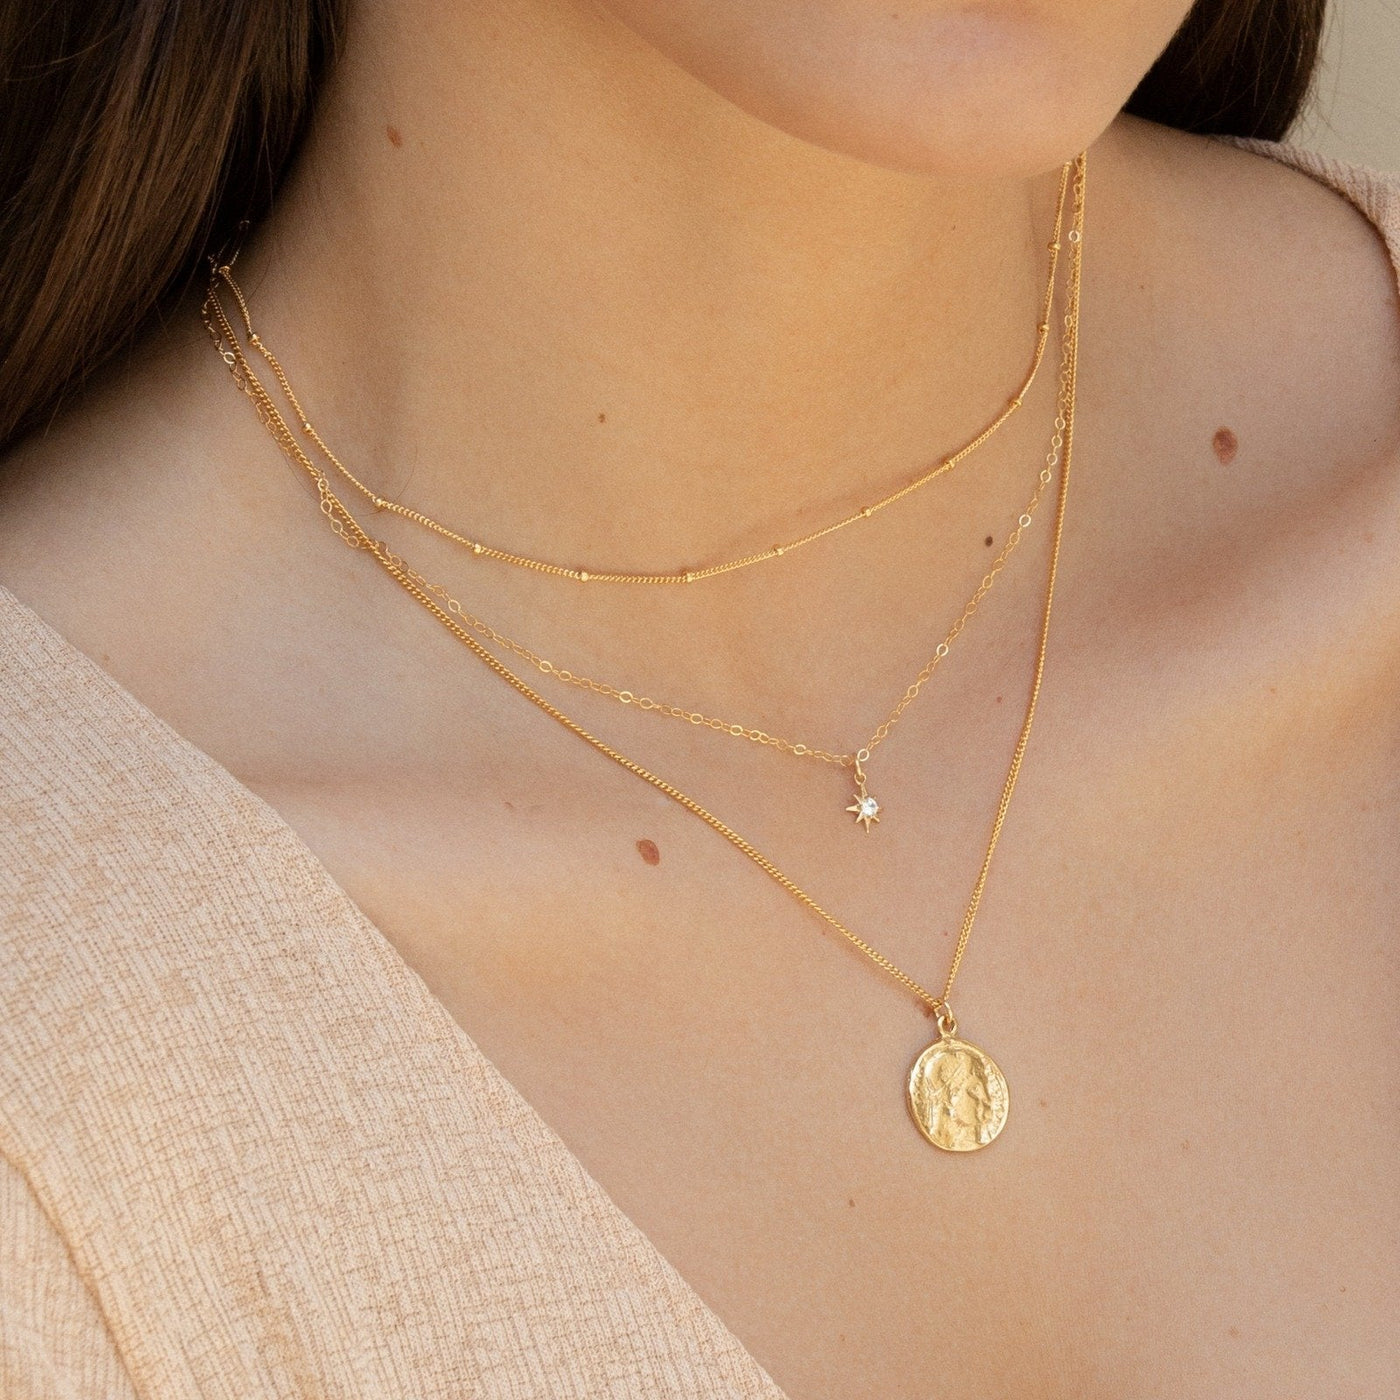 Satellite Necklace by Simple & Dainty Jewelry